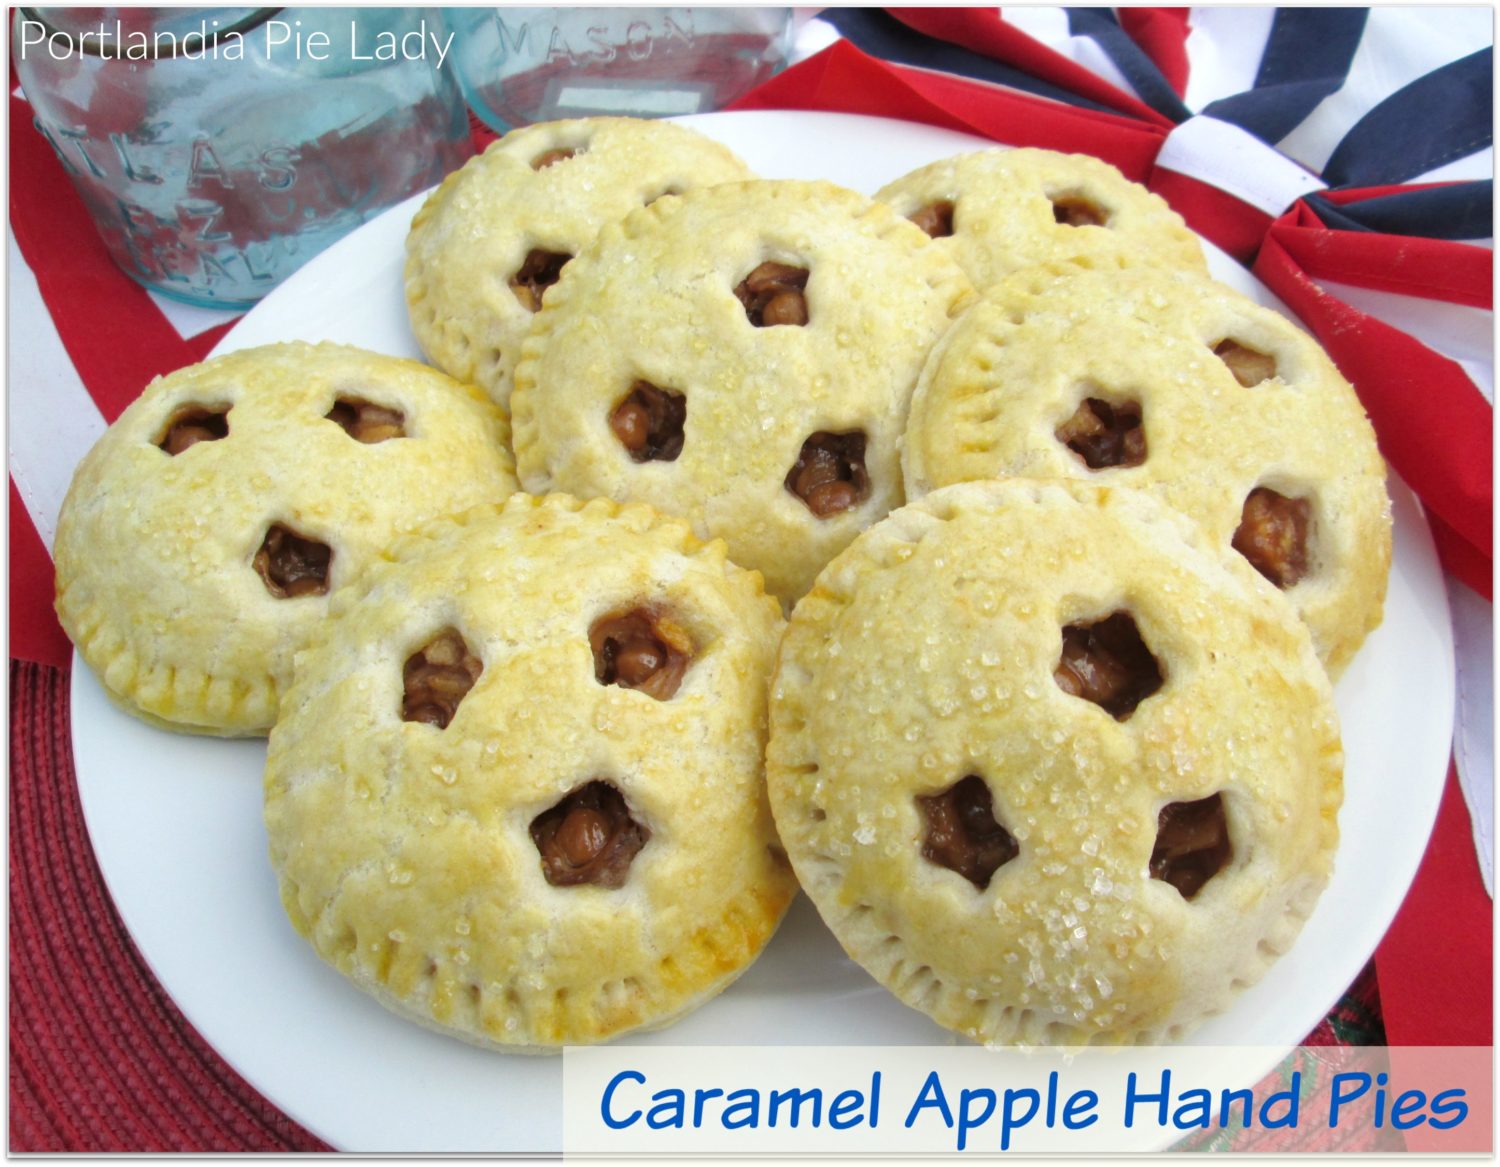 Caramel Apple Hand Pies a.k.a. Nature's Candy. Tart apples with melty caramel bits baked into buttery flaky crust, no forks needed!